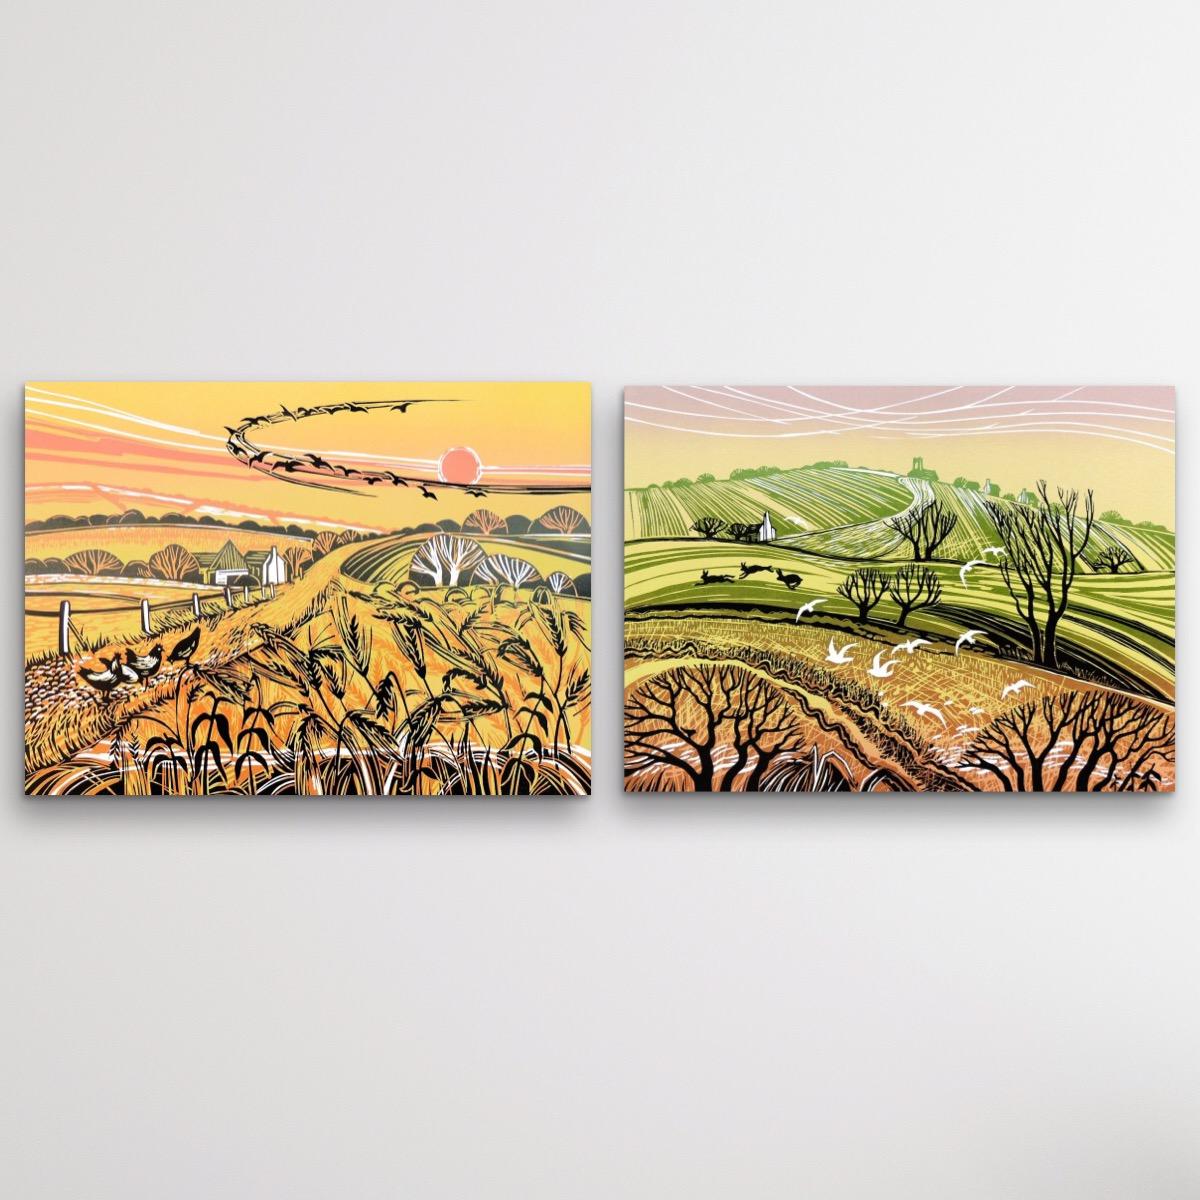 Harvest Fields and Hill Flight, Diptych, 2 landscape prints, Limited edition